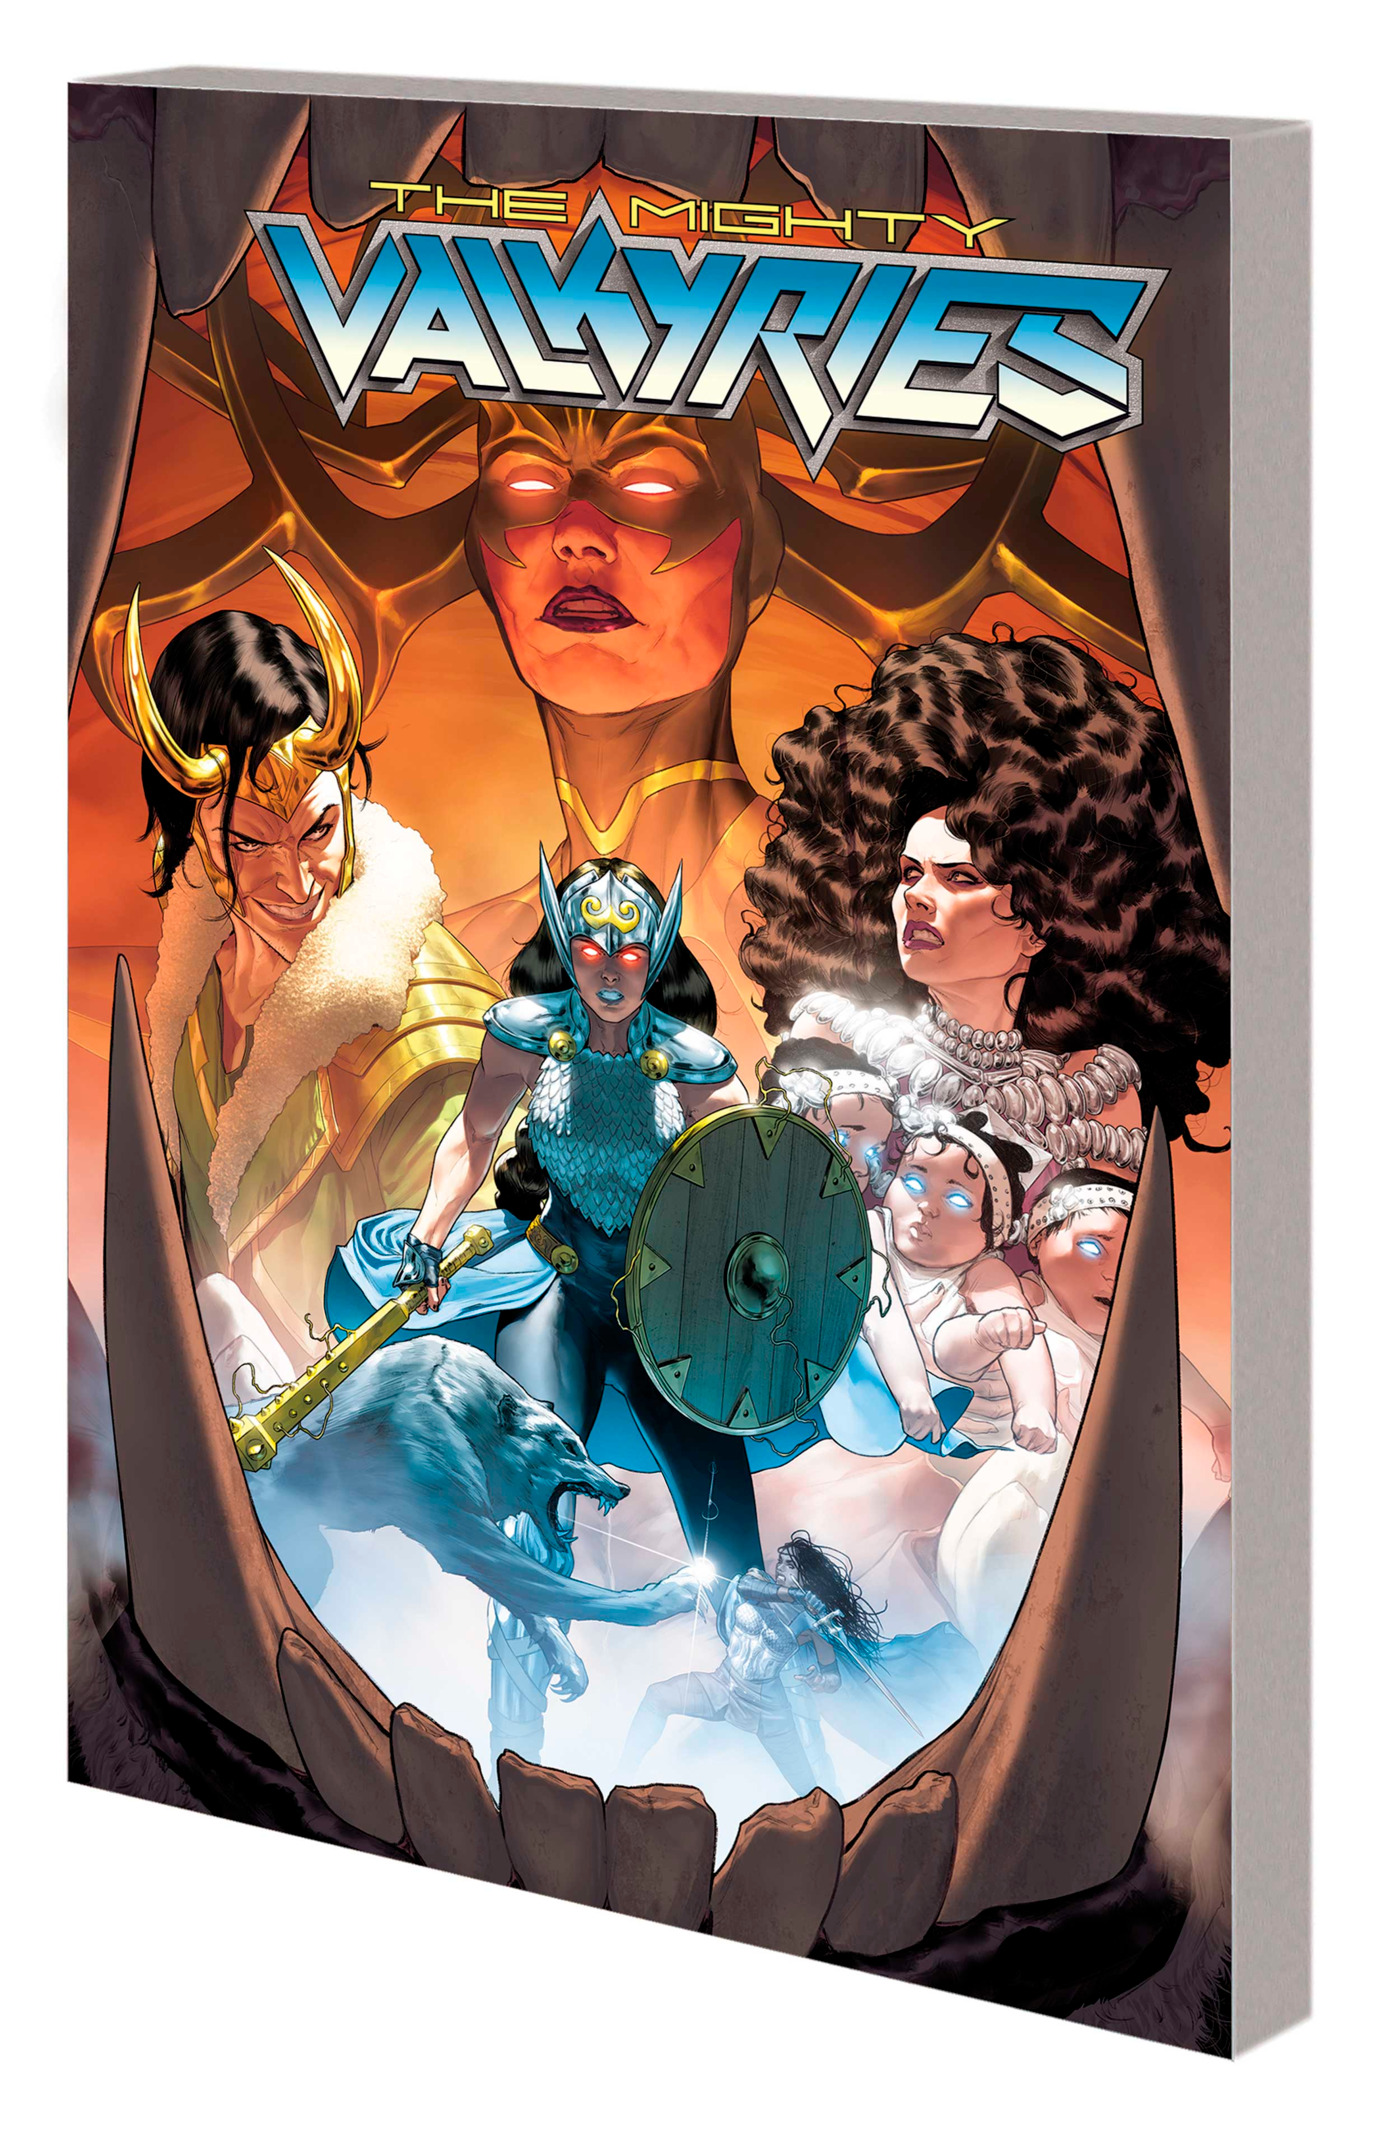 Mighty Valkyries Graphic Novel All Hell Let Loose